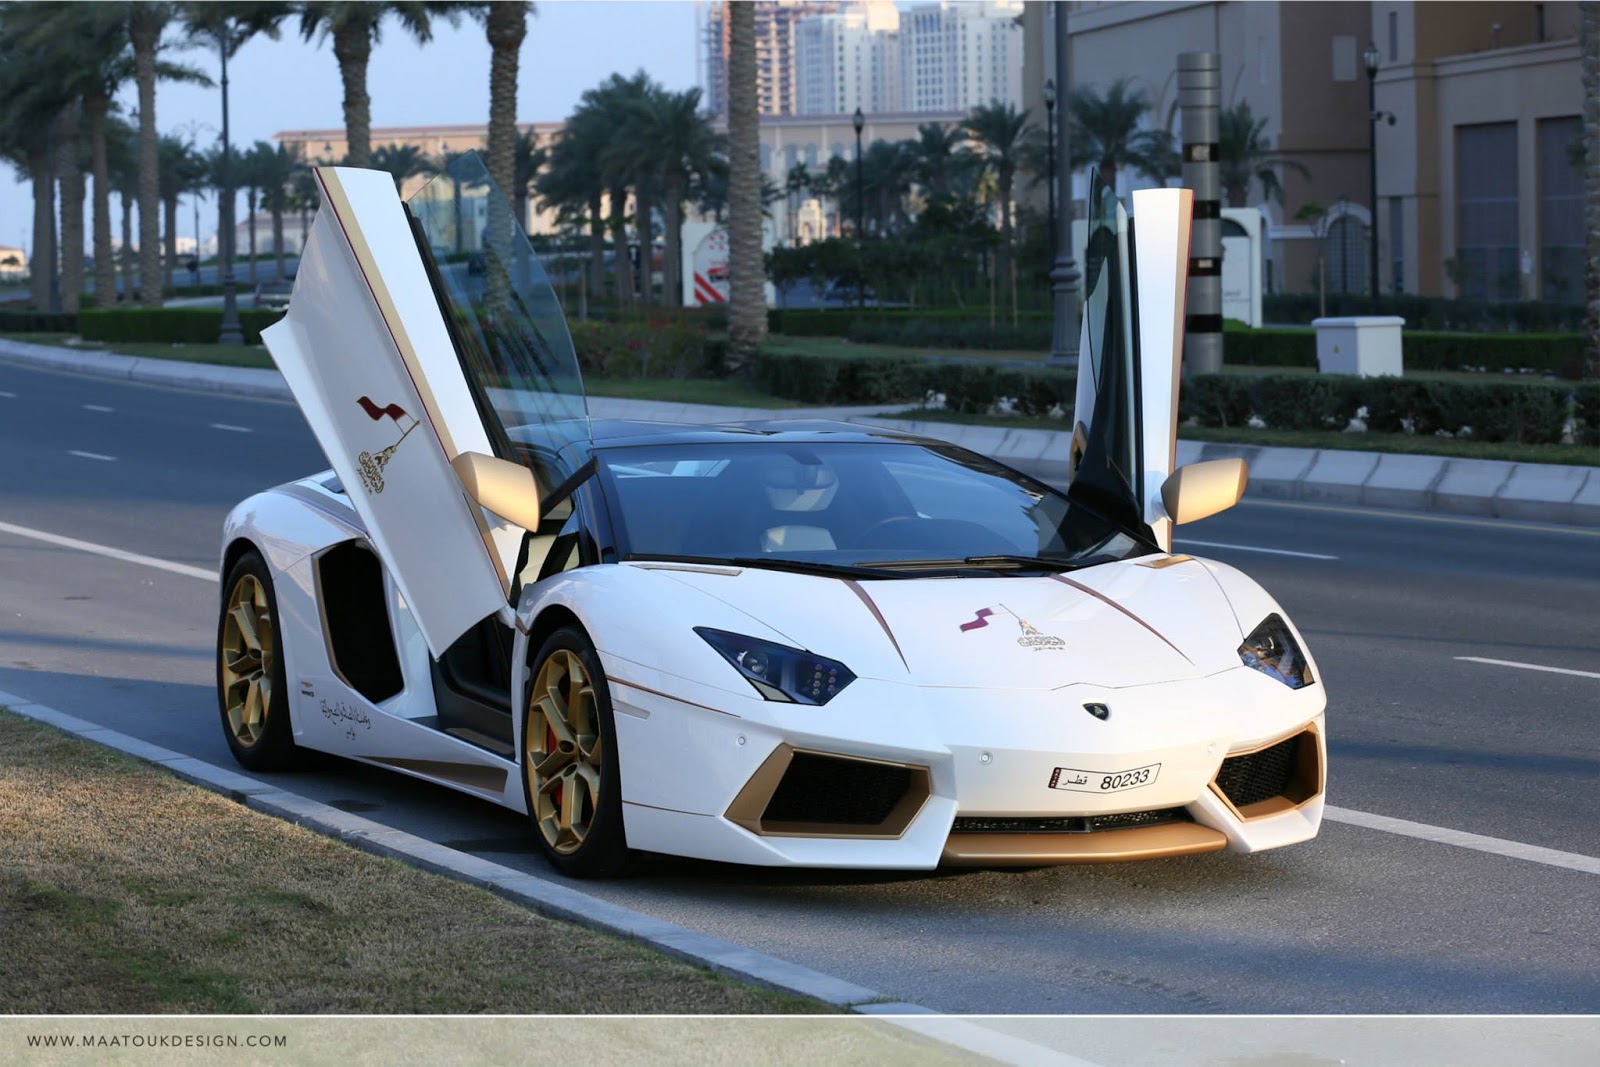 Meet the one-off gold plated Lamborghini Aventador Roadster Qatar National Day Edition